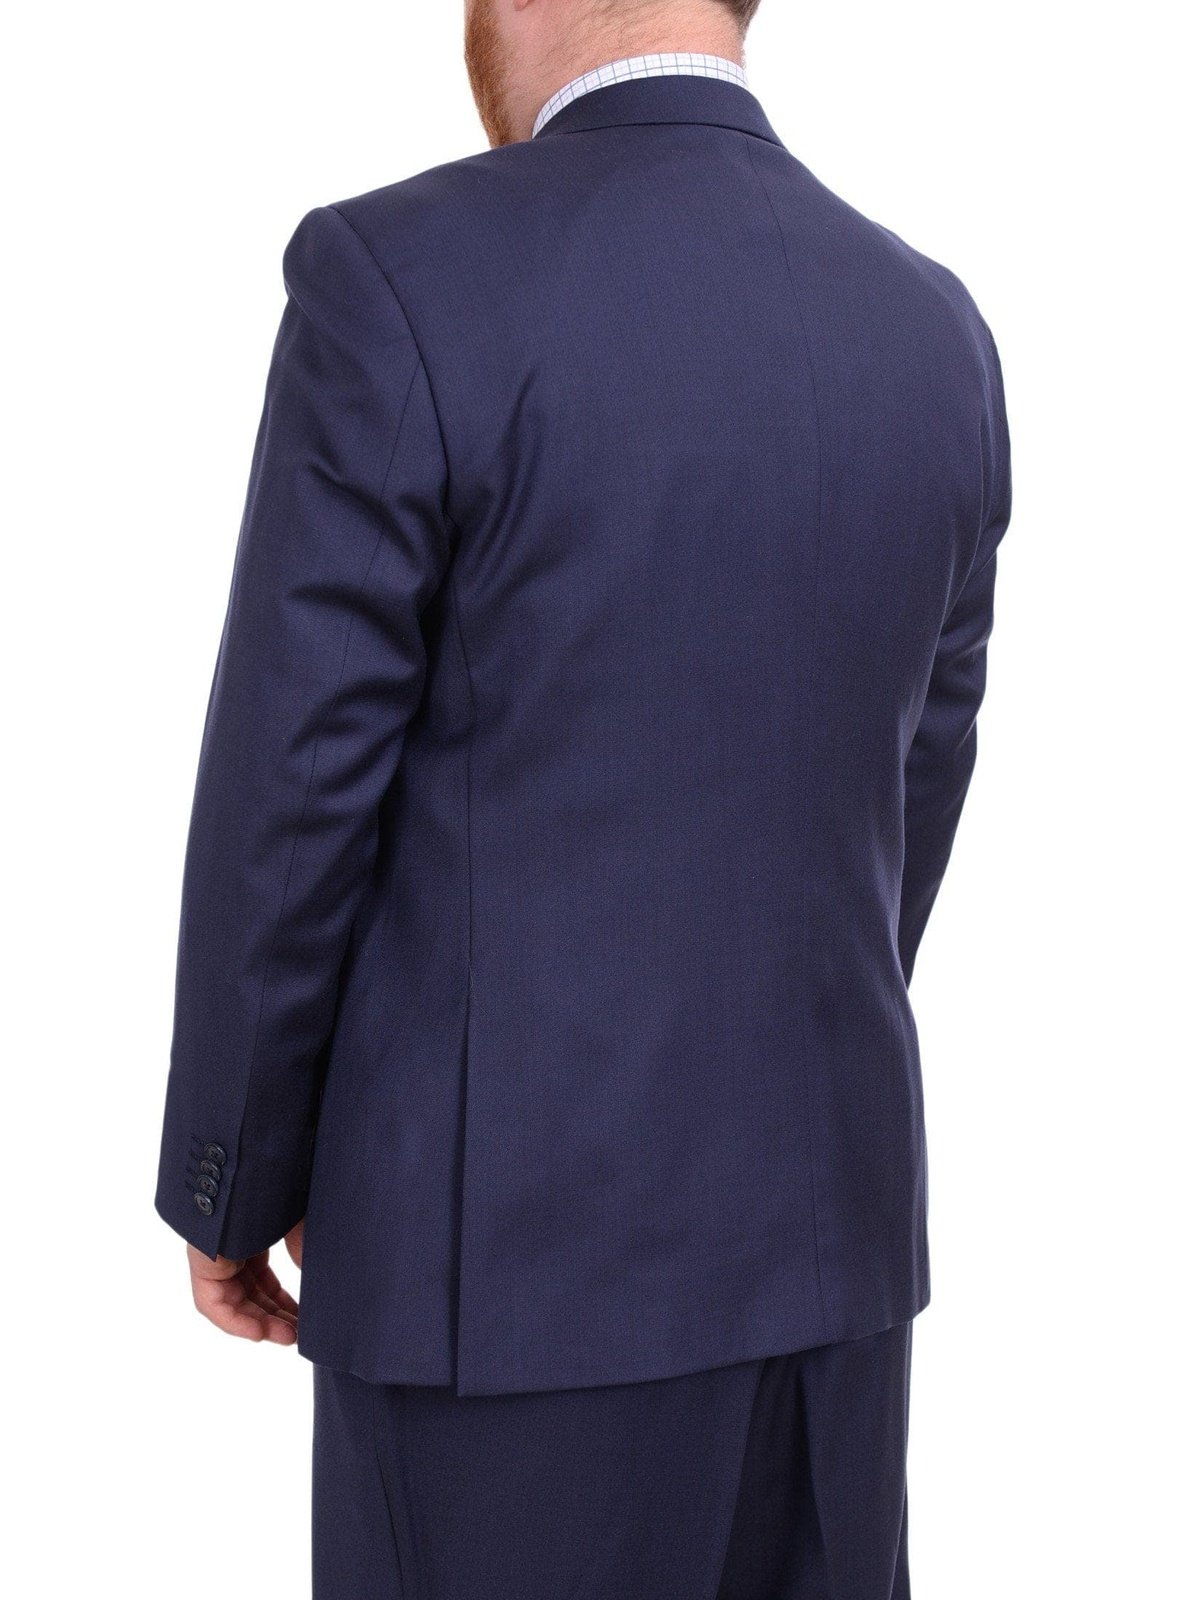 Lazetti Couture TWO PIECE SUITS Lazetti Couture Men's Portly Fit Solid Navy Blue Two Button 100% Wool Suit